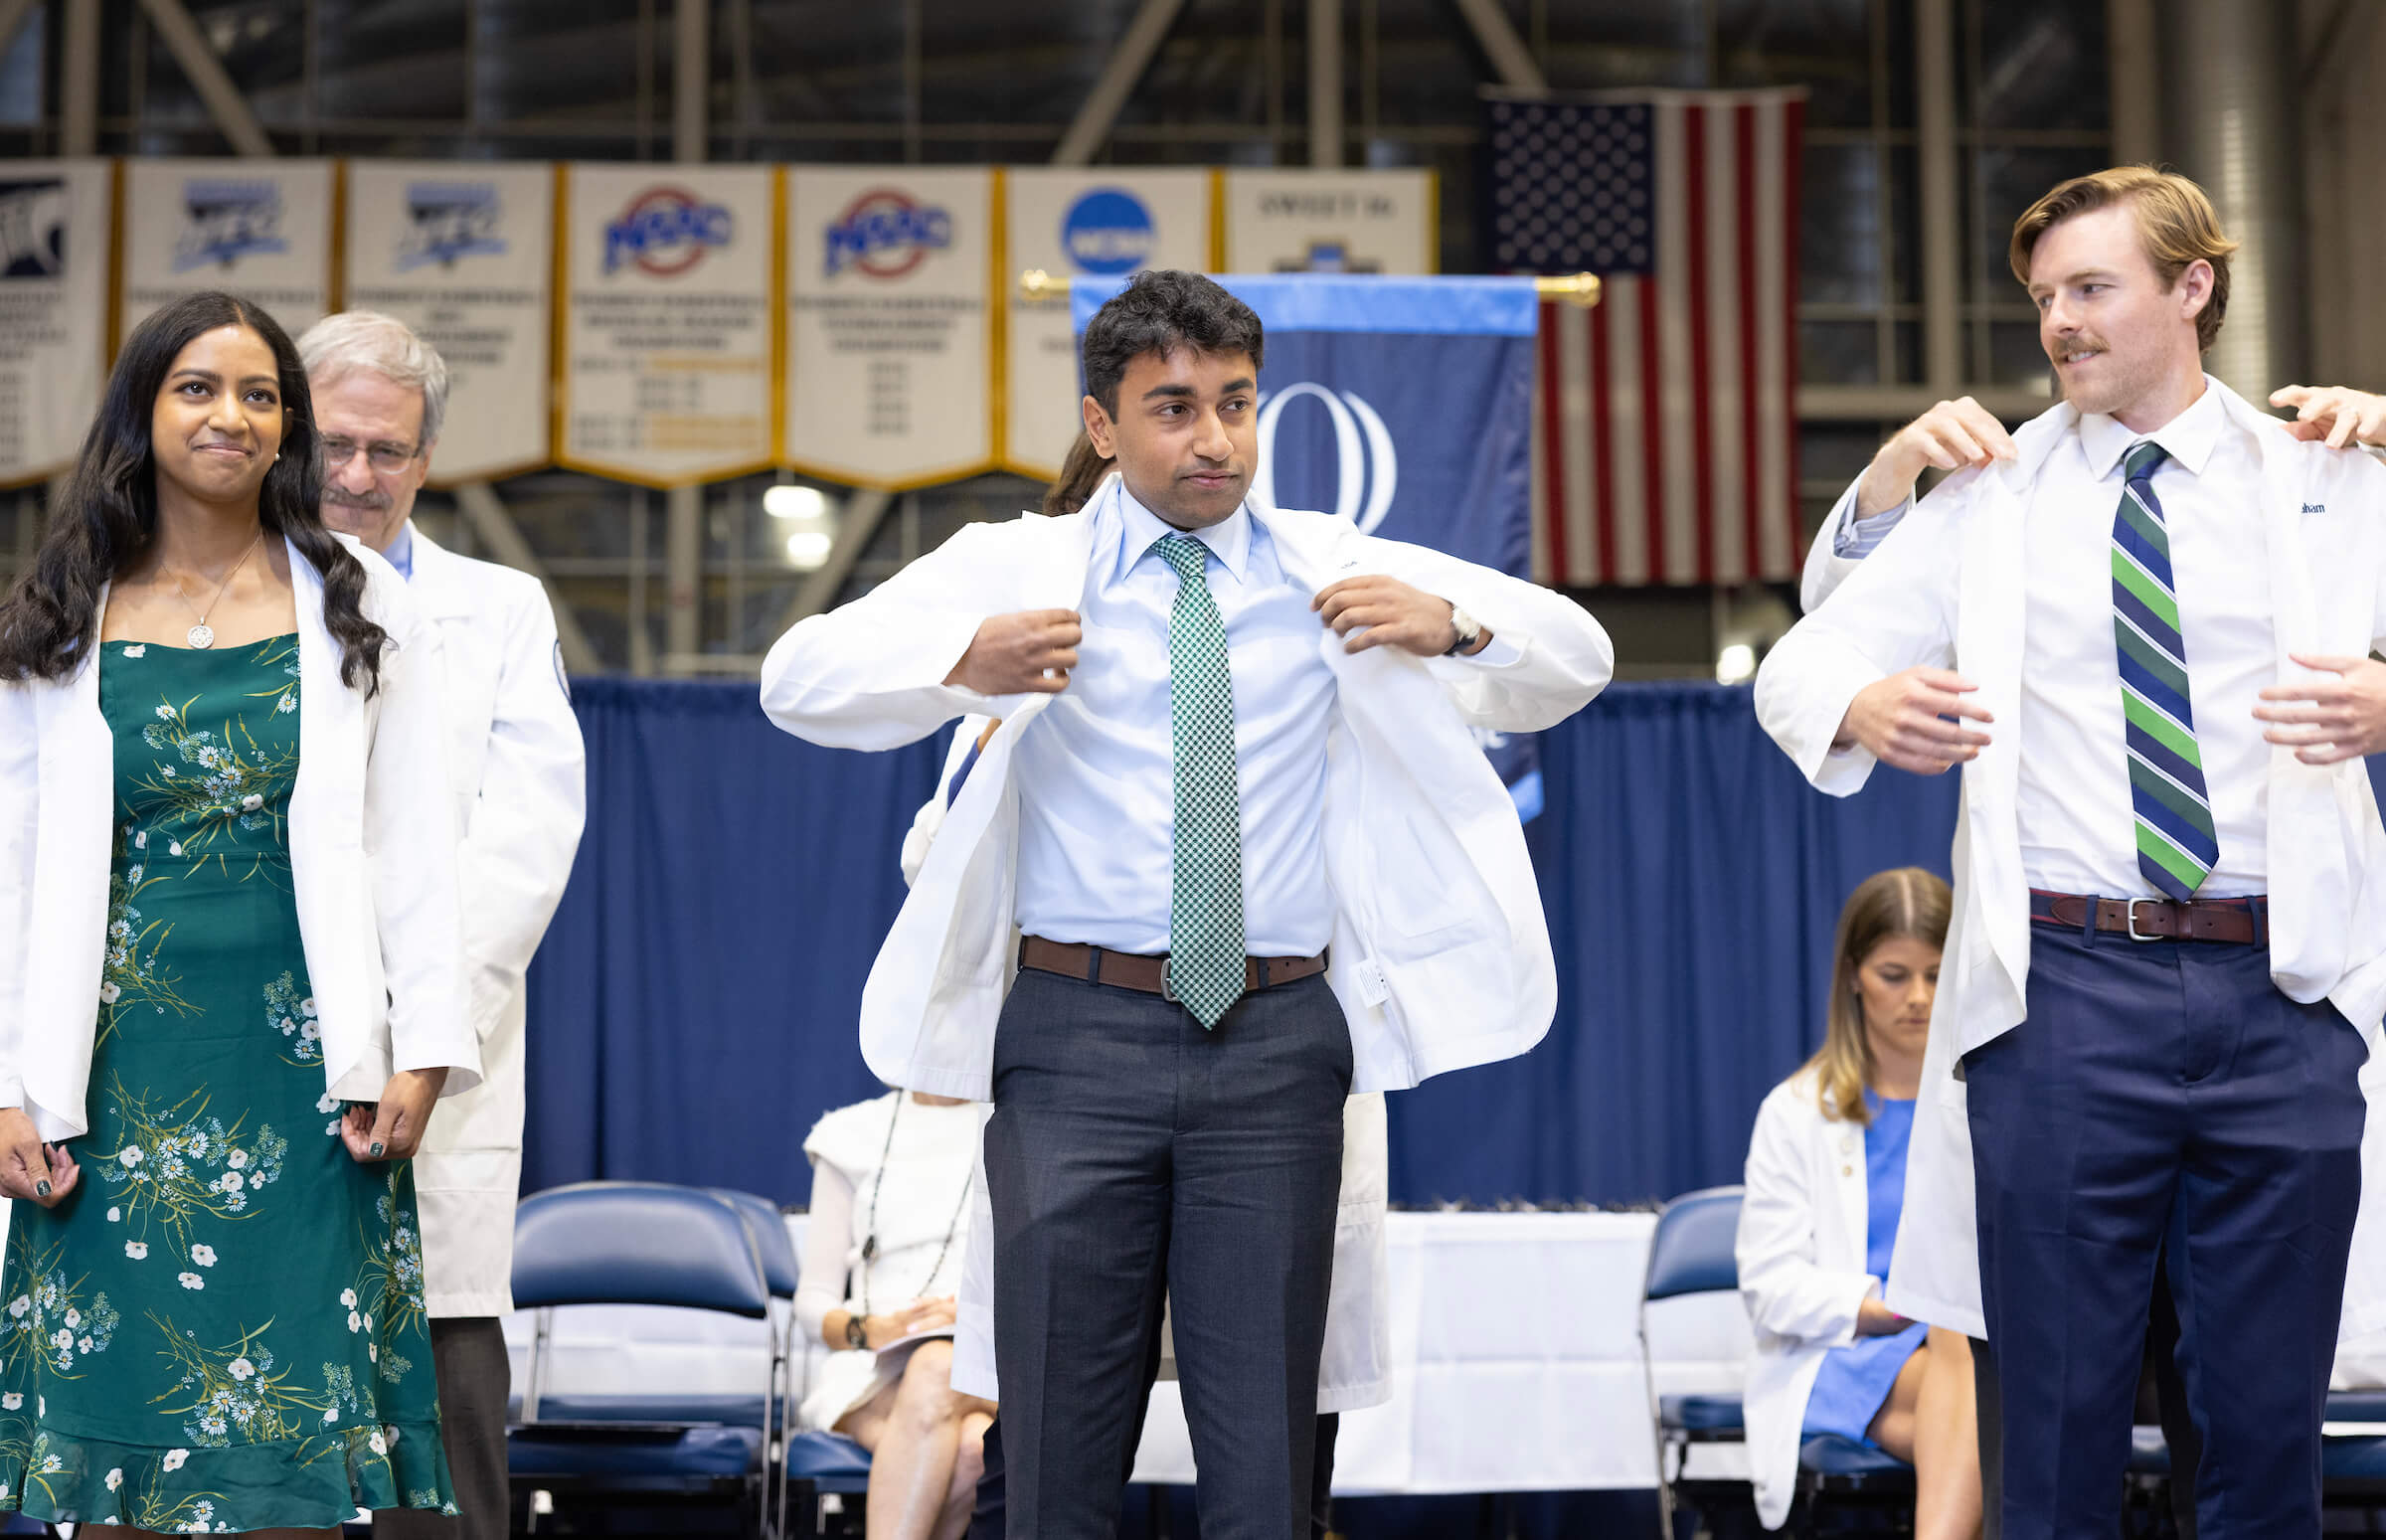 Students proud to receive their white coat